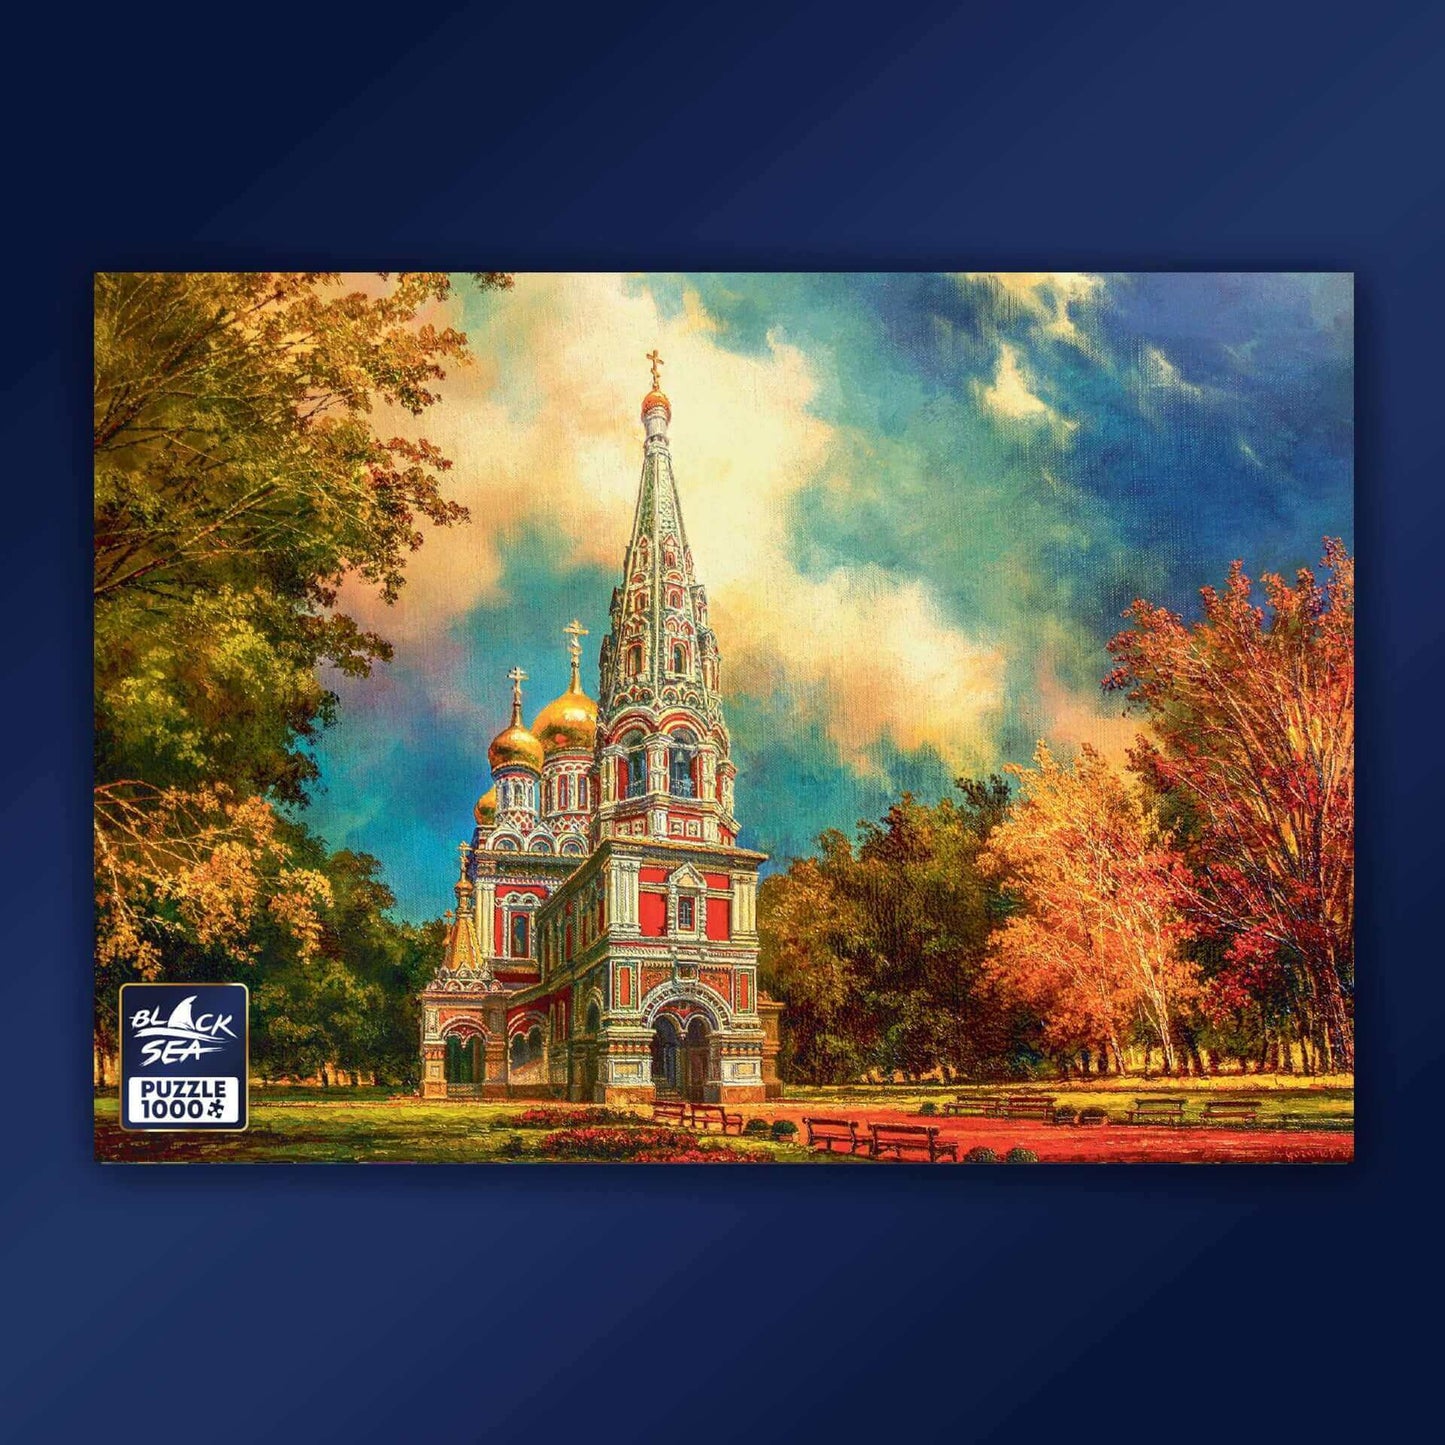 Puzzle Black Sea Premium 1000 pieces - Shipka Memorial Church, The Shipka Memorial Church is a masterpiece of church architecture; it has 17 bells that echo across the neighbouring hills during celebrations. The church is a part of an extensive complex th